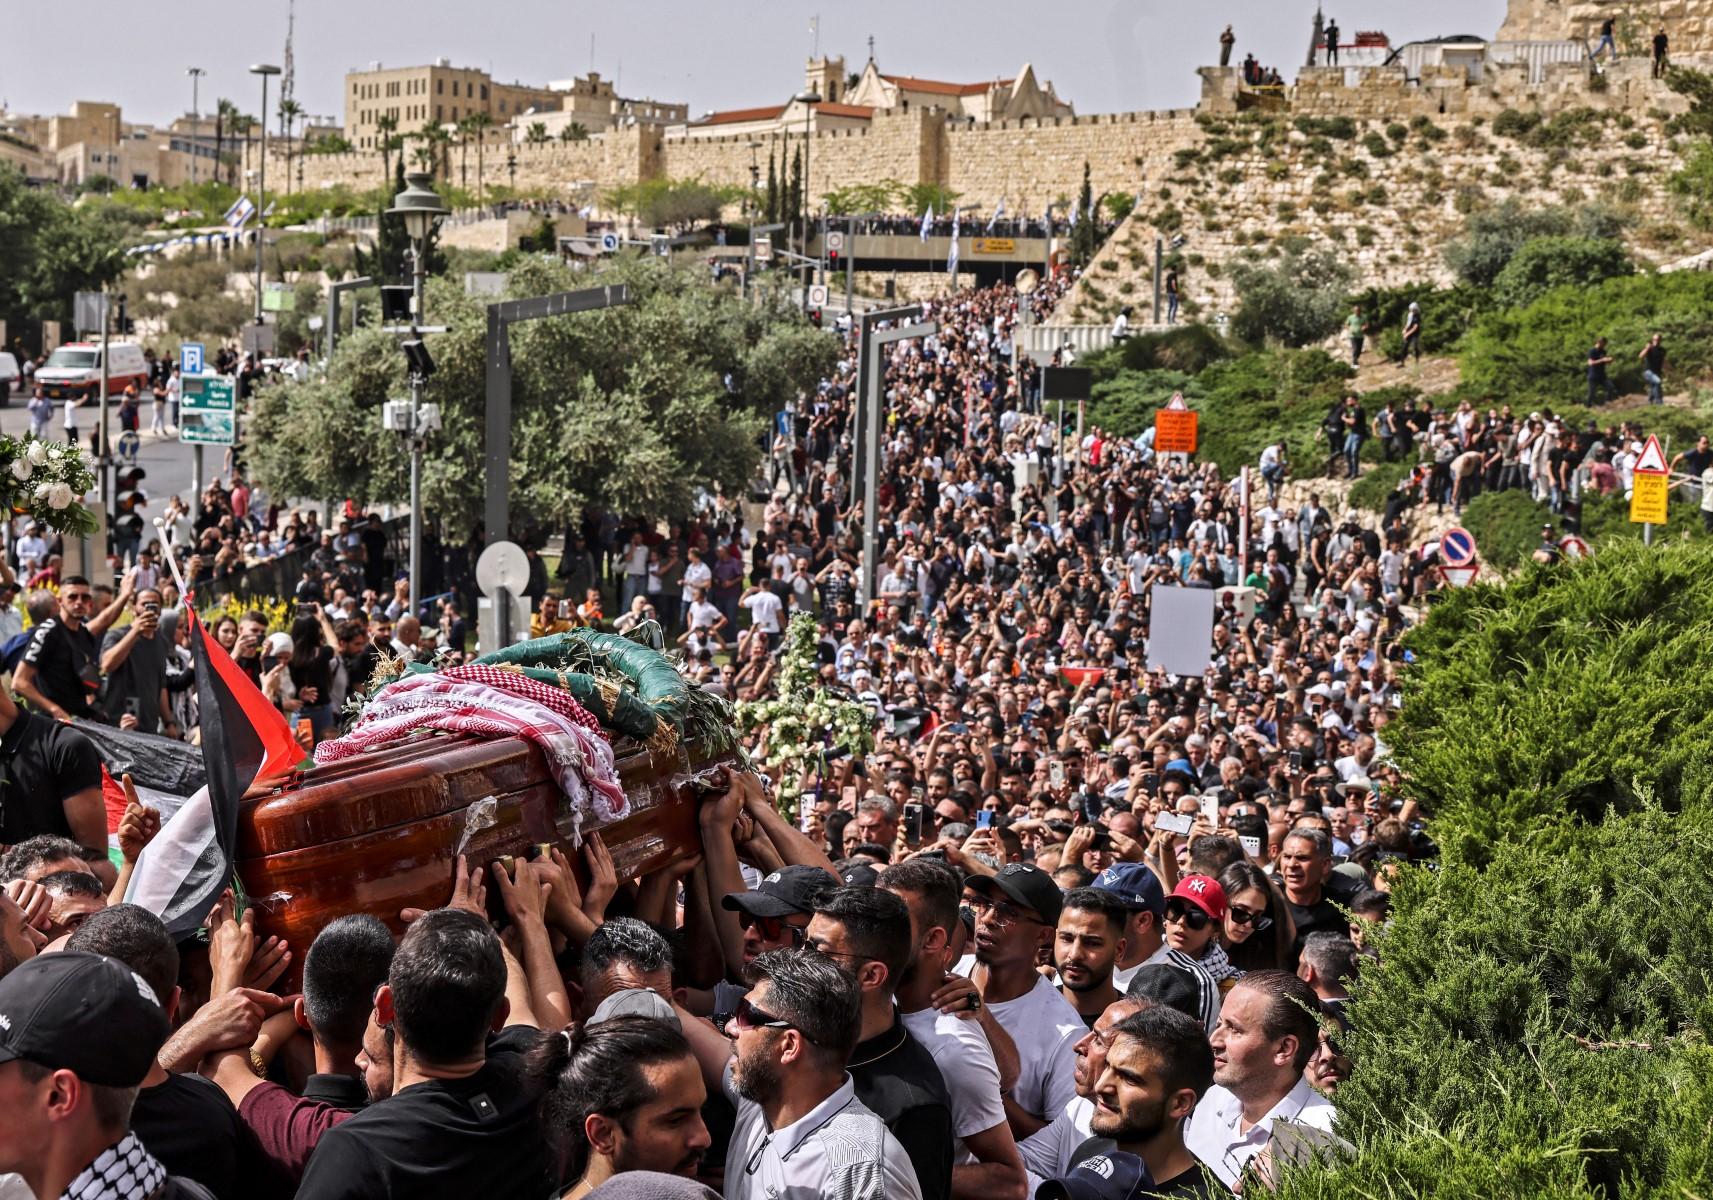 Palestinian mourners carry the casket of slain Al Jazeera journalist Shireen Abu Akleh from the church towards the cemetary, during her funeral procession in Jerusalem, on May 13. Photo: AFP